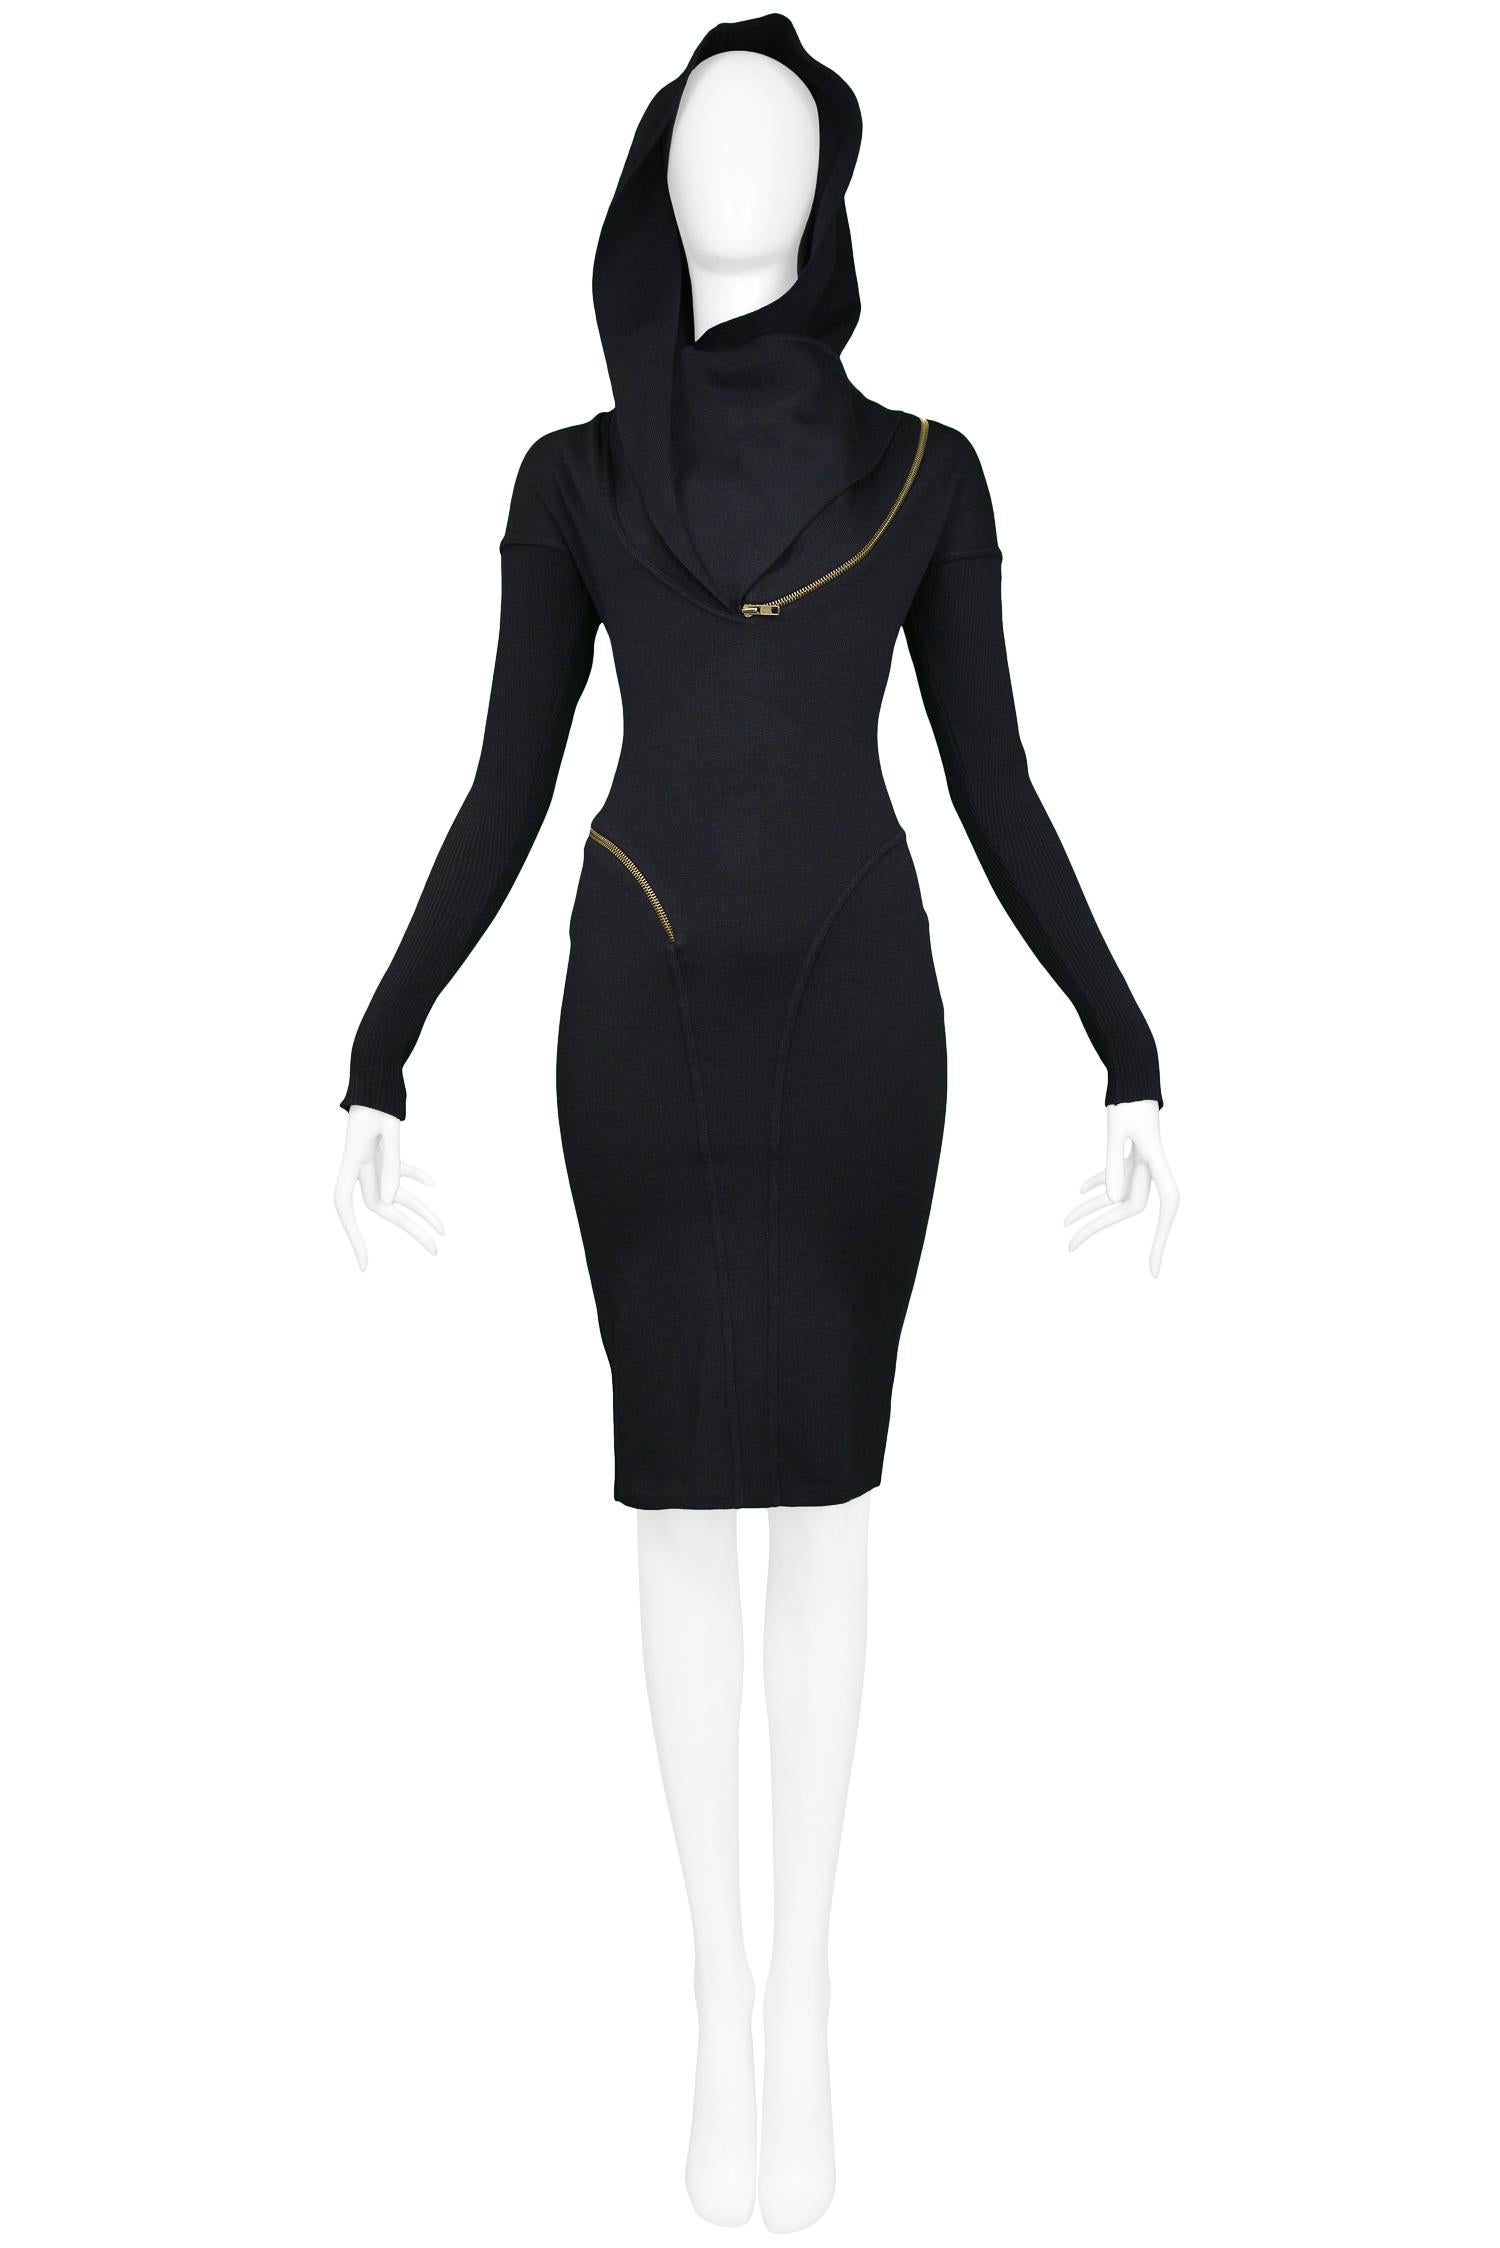 Iconic vintage museum-quality Azzedine Alaia black knit hooded zipper dress featuring a slim body-con fit, long sleeves & brass zipper detail that wraps around the body. The collar can be zipped into a hood or worn unzipped as a collar. The knit has